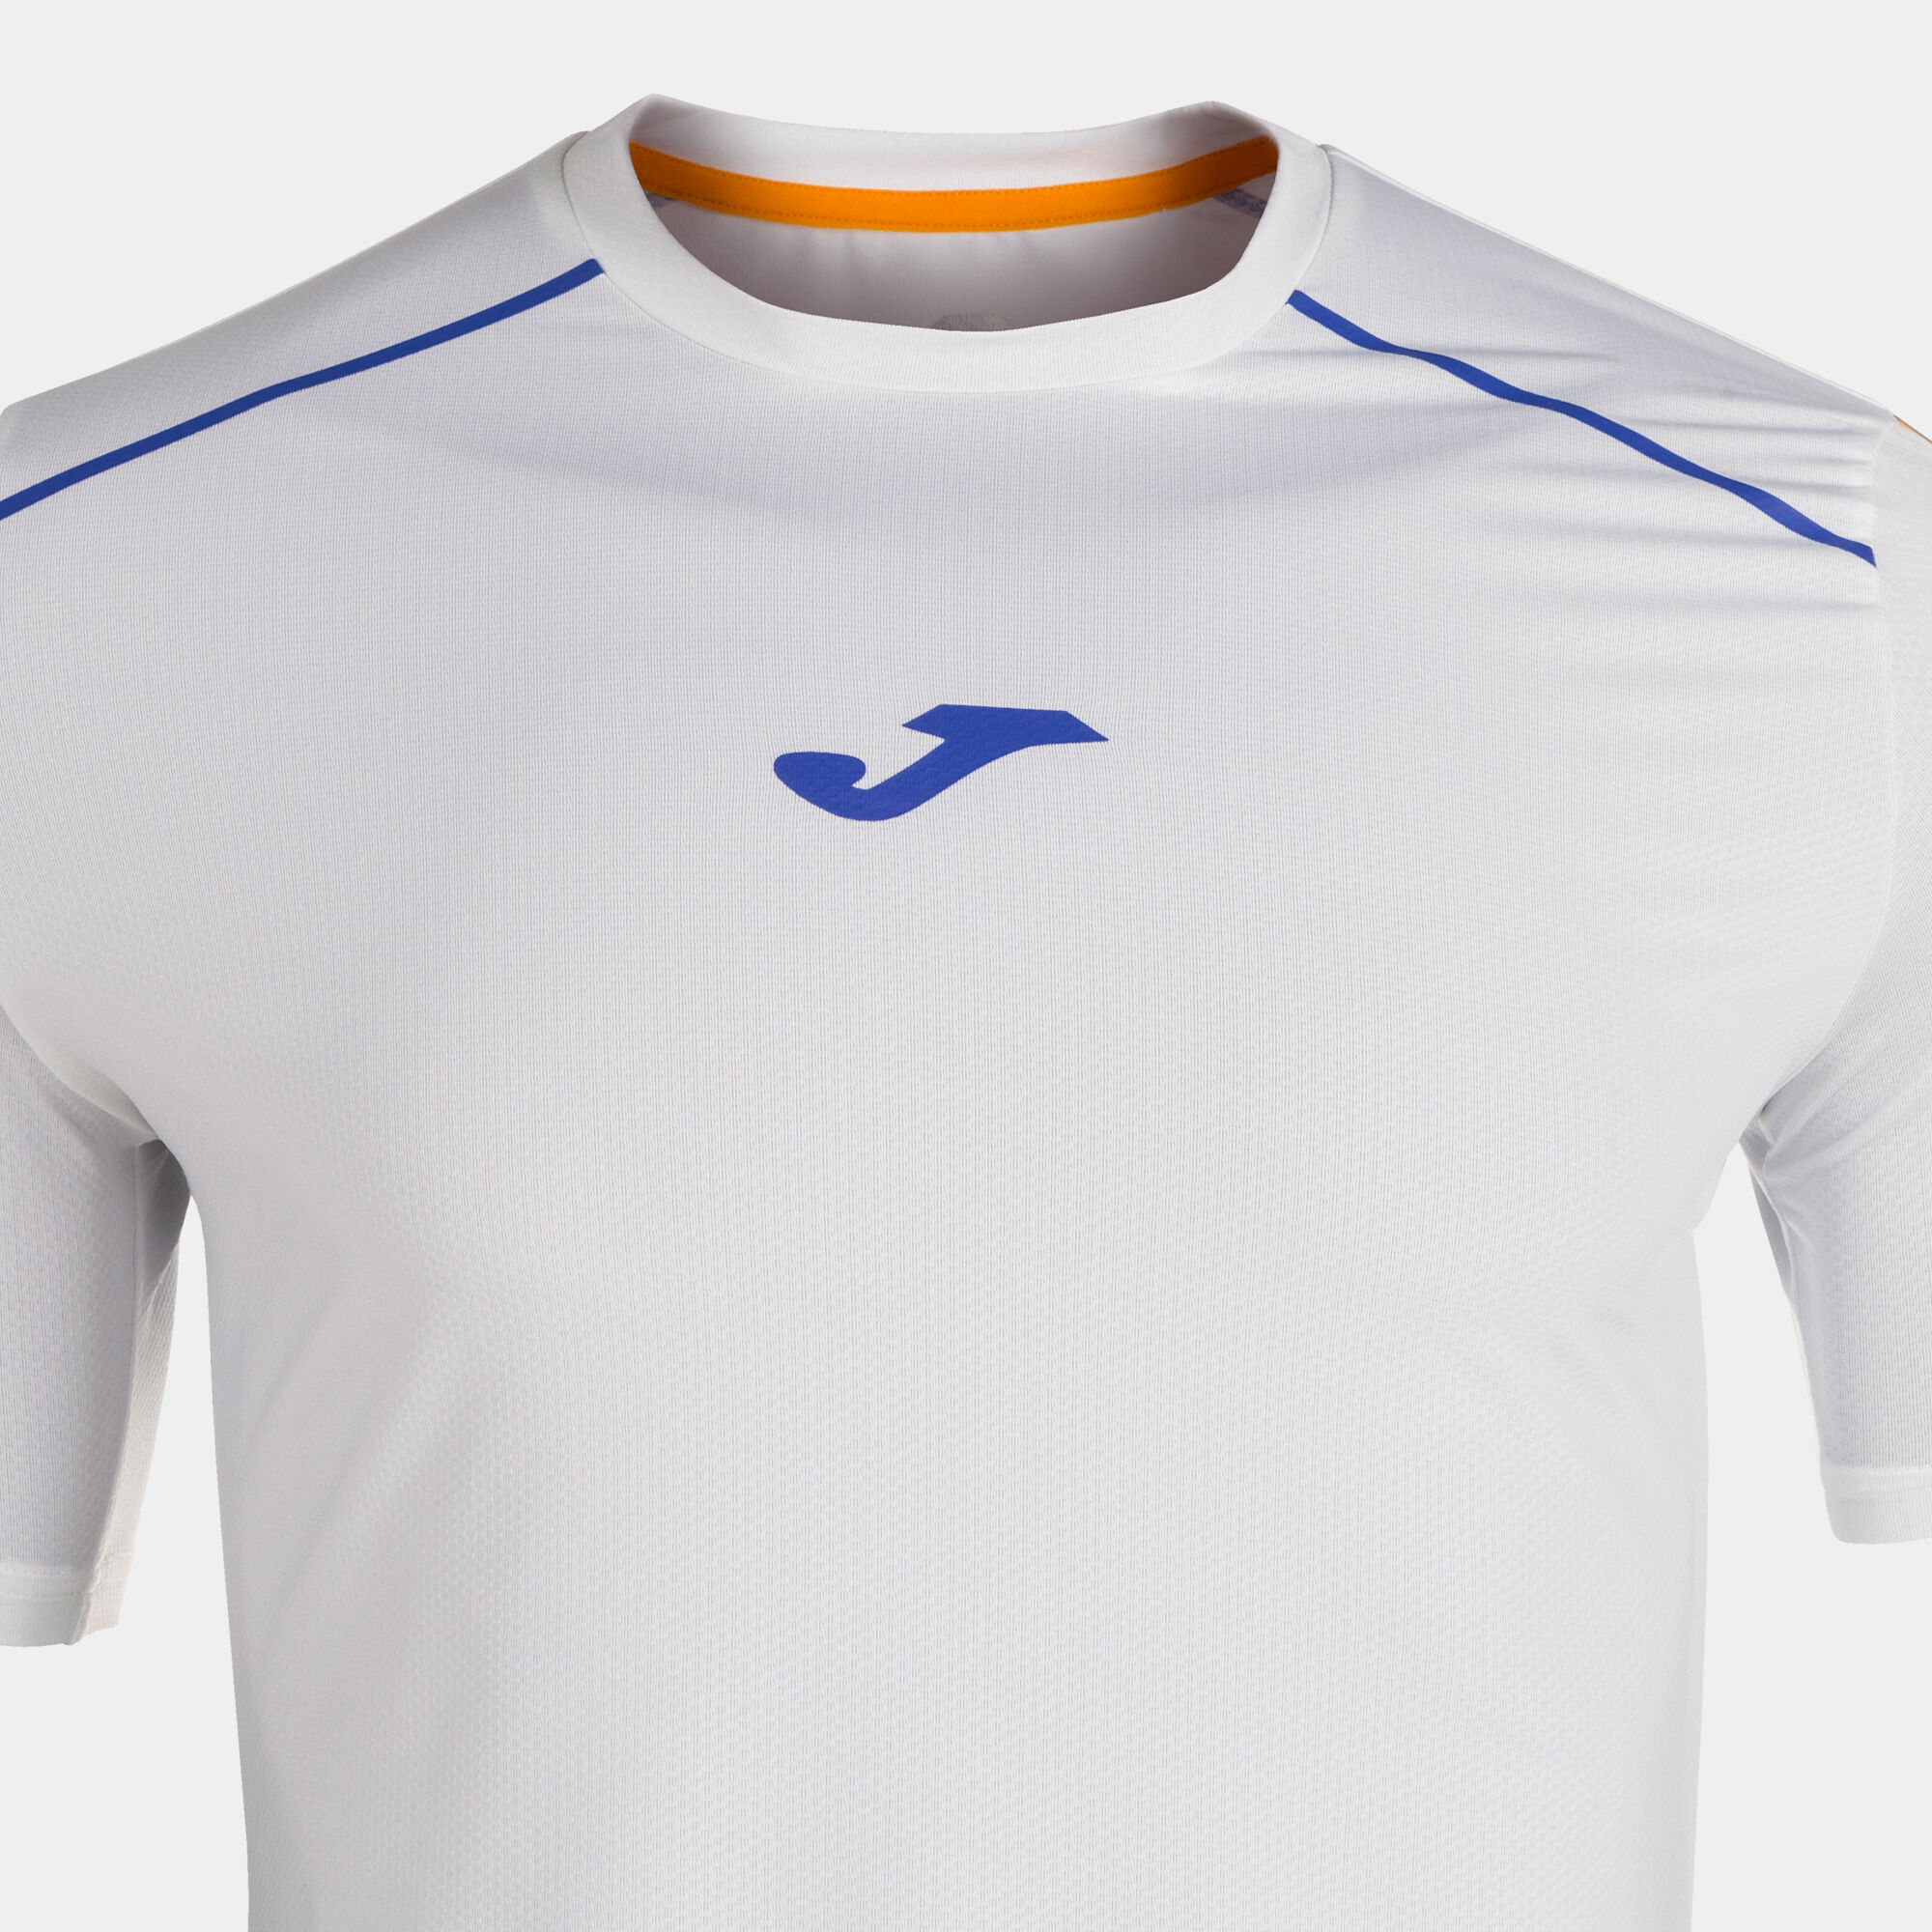 MAILLOT MANCHES COURTES HOMME TORNEO BLANC